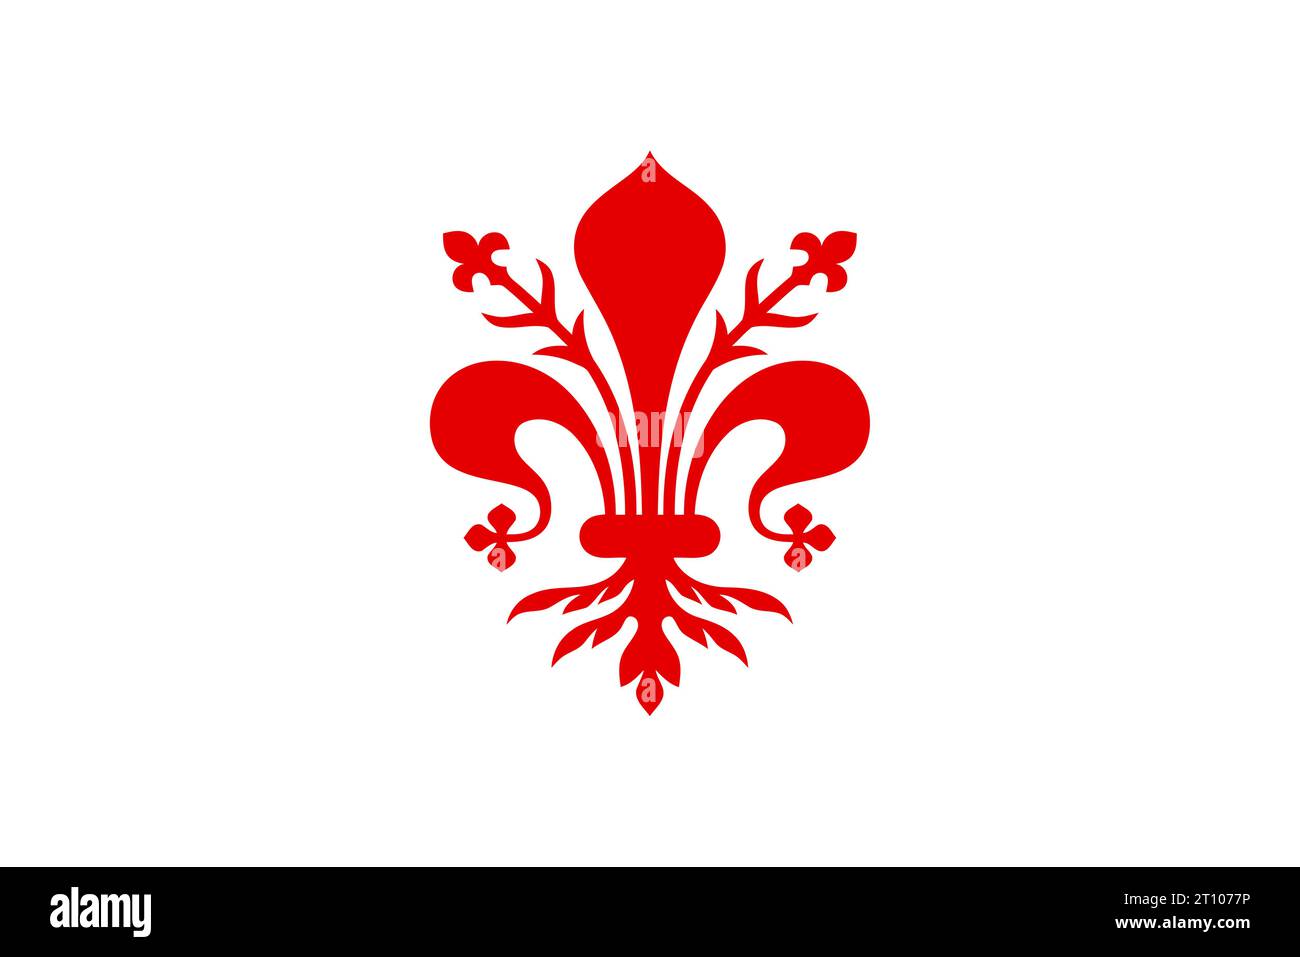 Flag of Florence vector illustration. Coat of arms of Florence - Tuscany, vector illustration. The fleur de lis of Florence, symbol of Florence, Italy Stock Vector